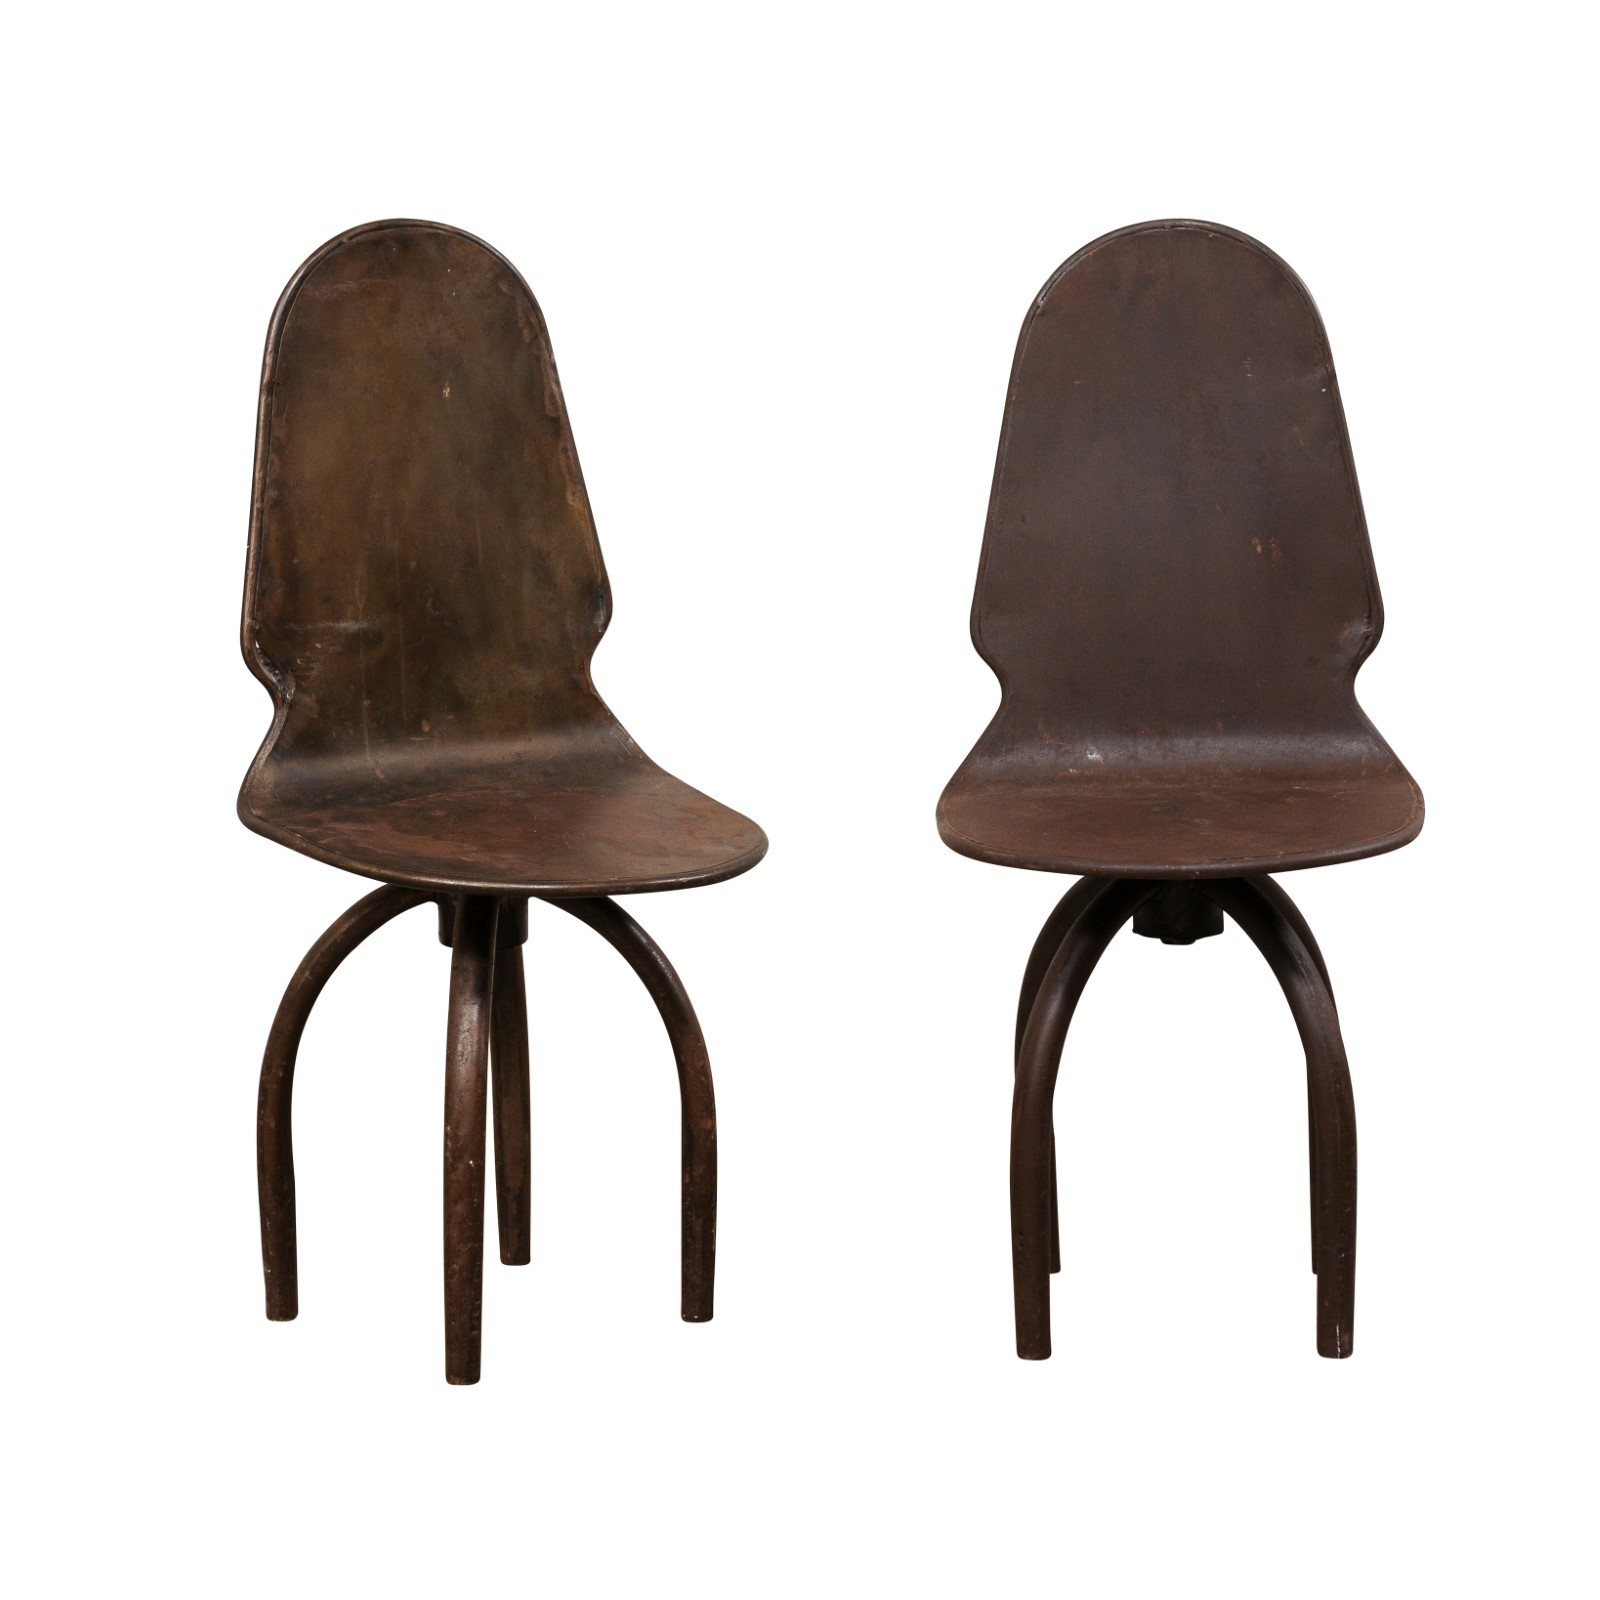 Funky Pair of Iron Spider-Leg Chairs, Spain